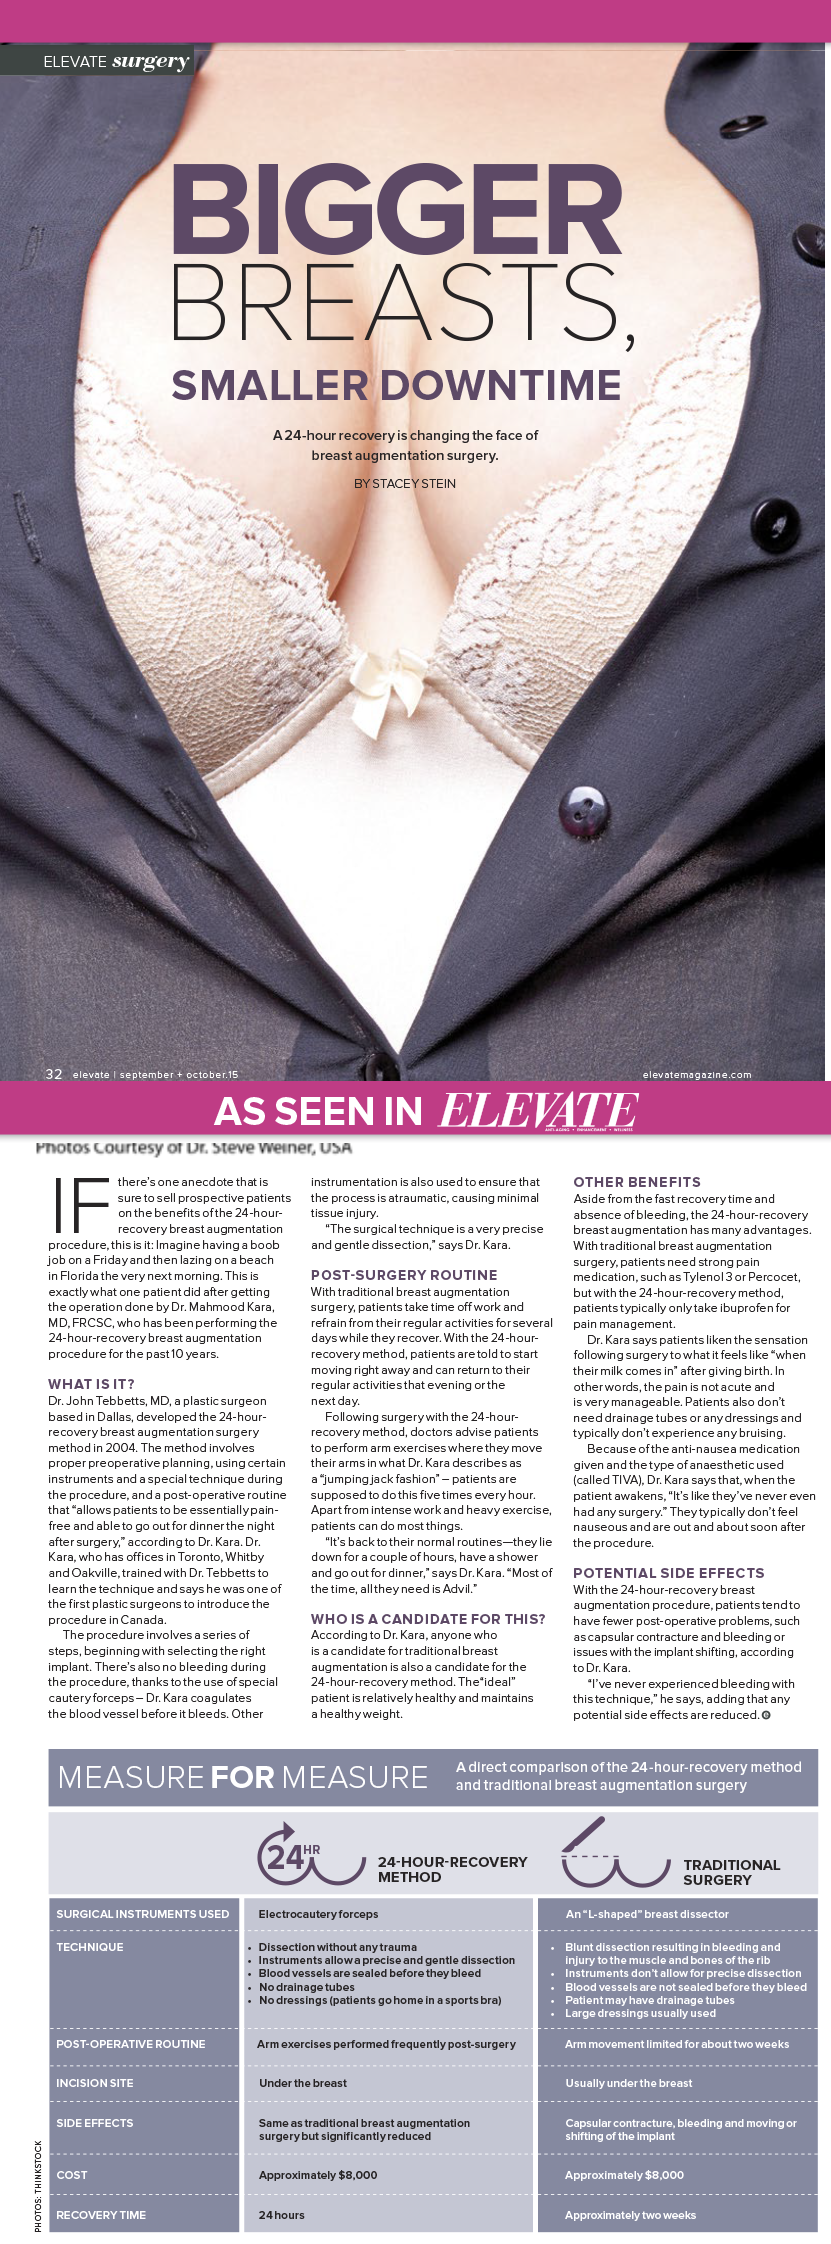 24 Hour breast augmentation article in Elevate magazine.